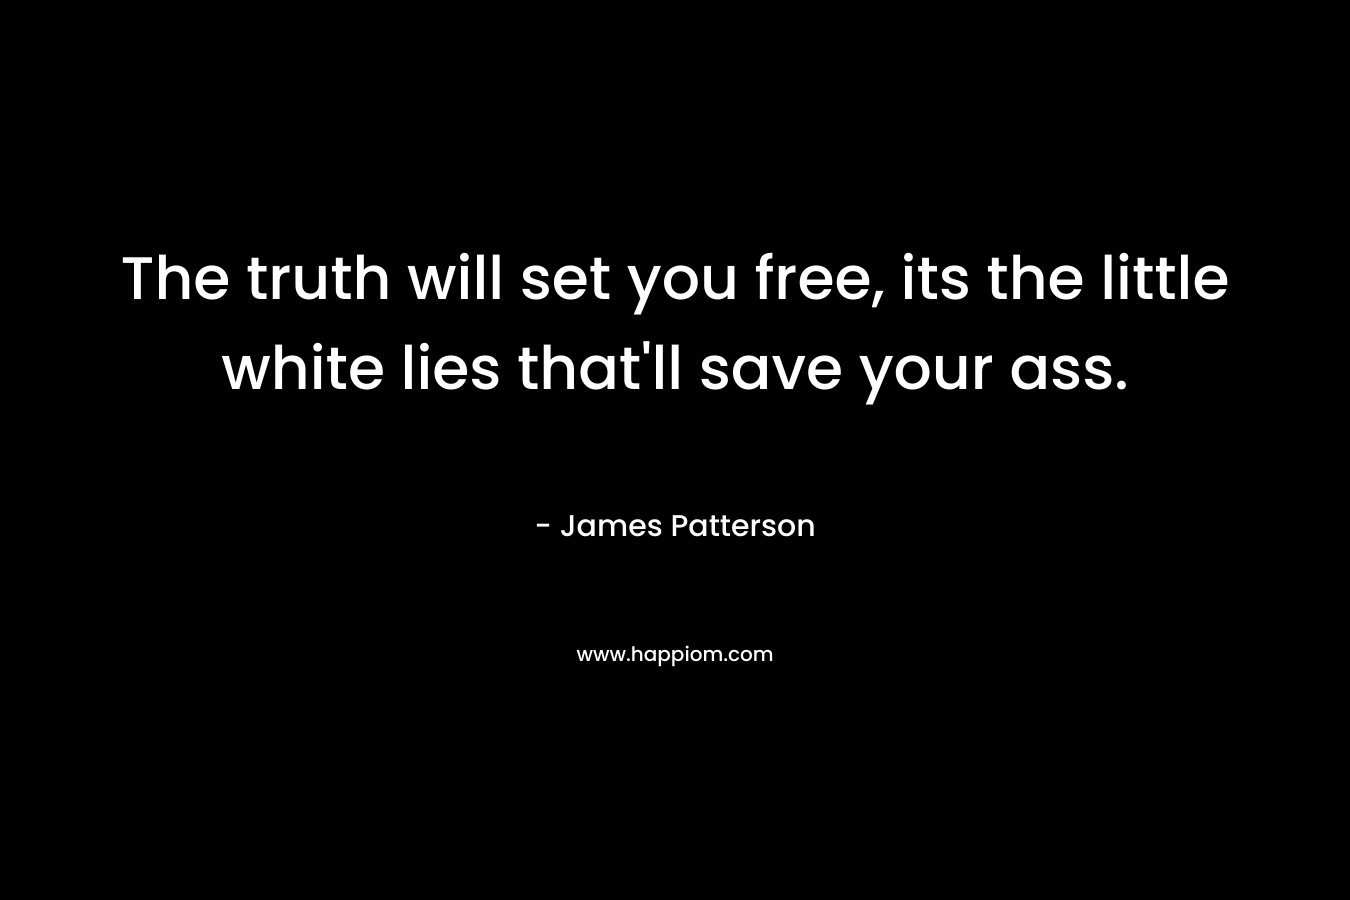 The truth will set you free, its the little white lies that’ll save your ass. – James Patterson